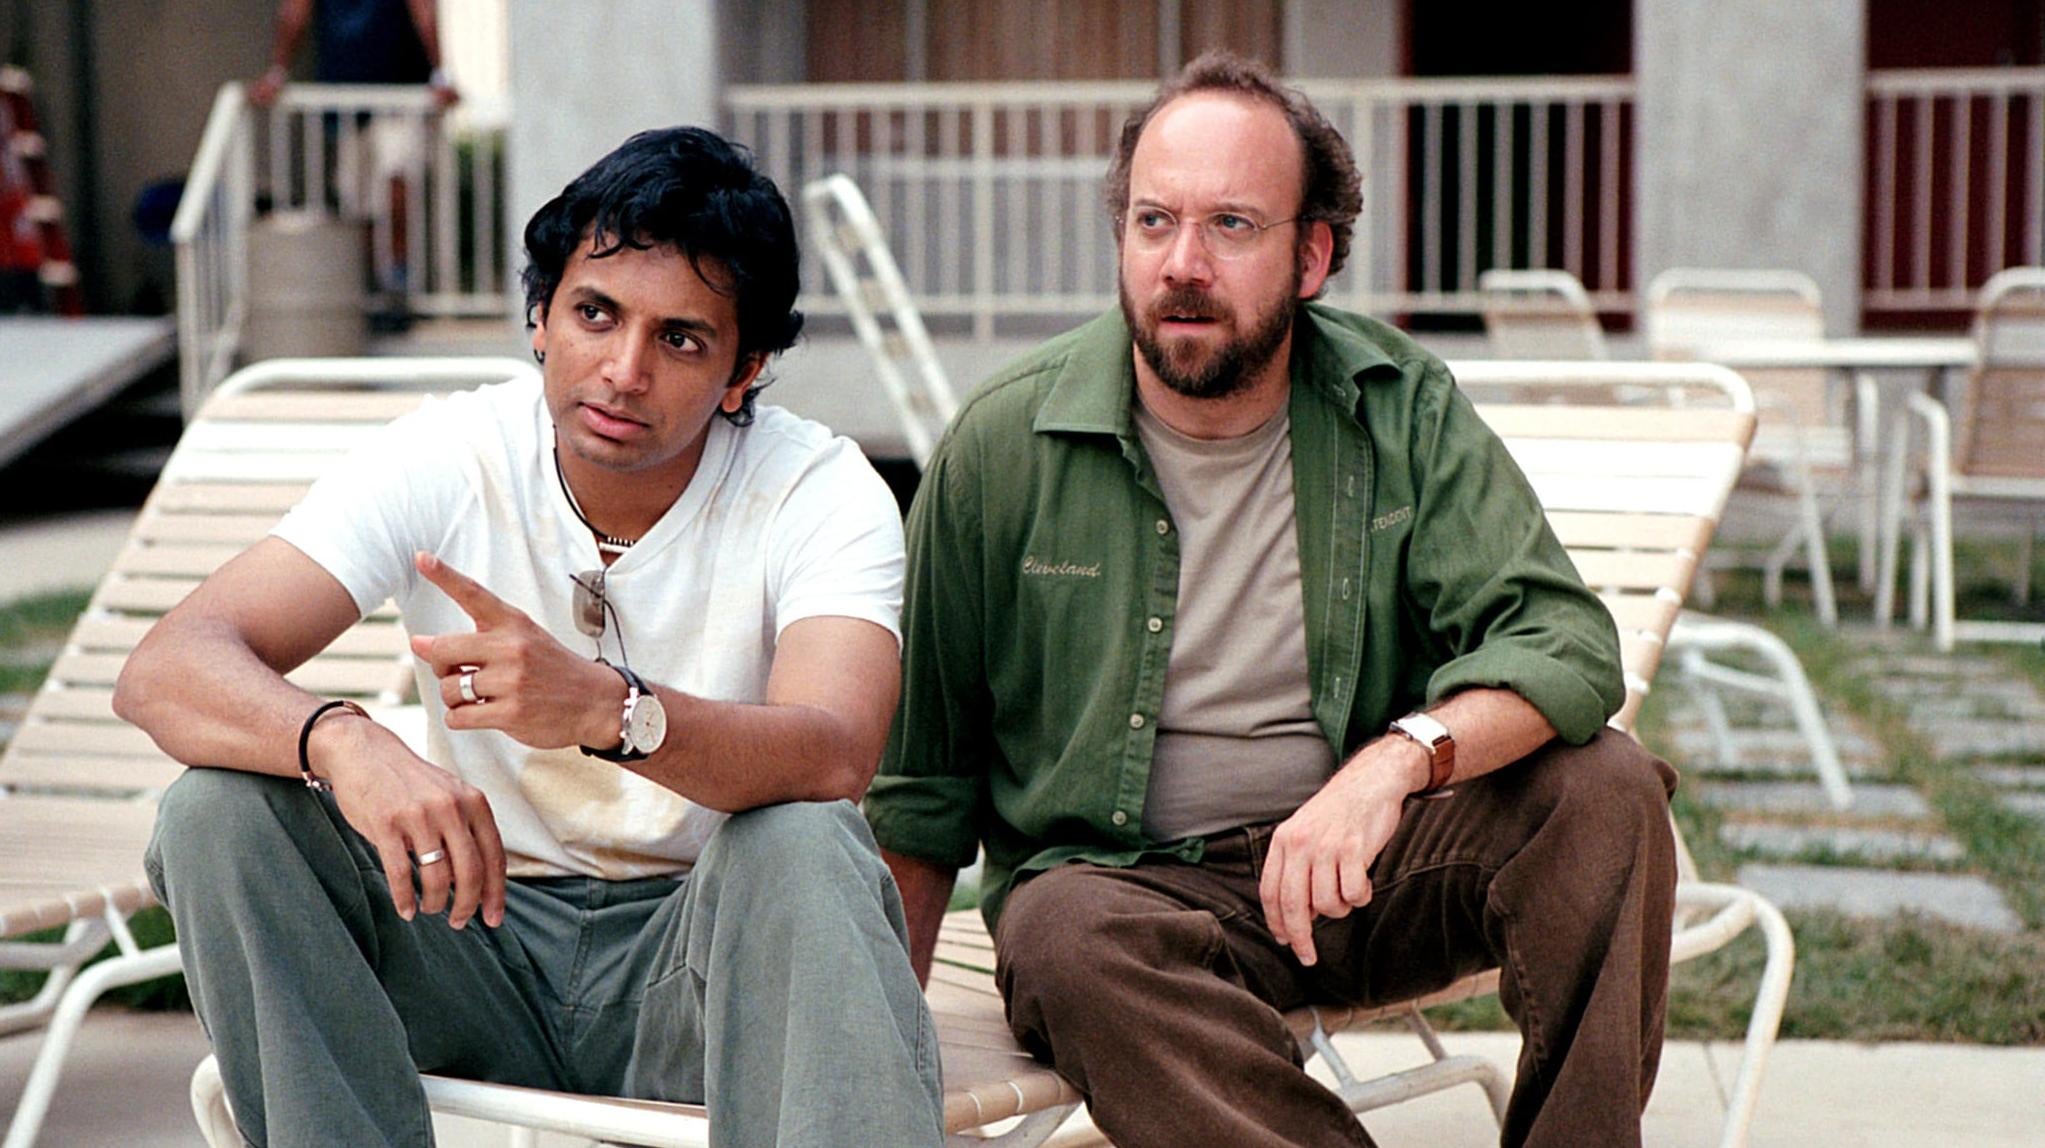 M. Night Shyamalan (left) played a character of grave importance in his own movie. (Photo: Warner Bros.)